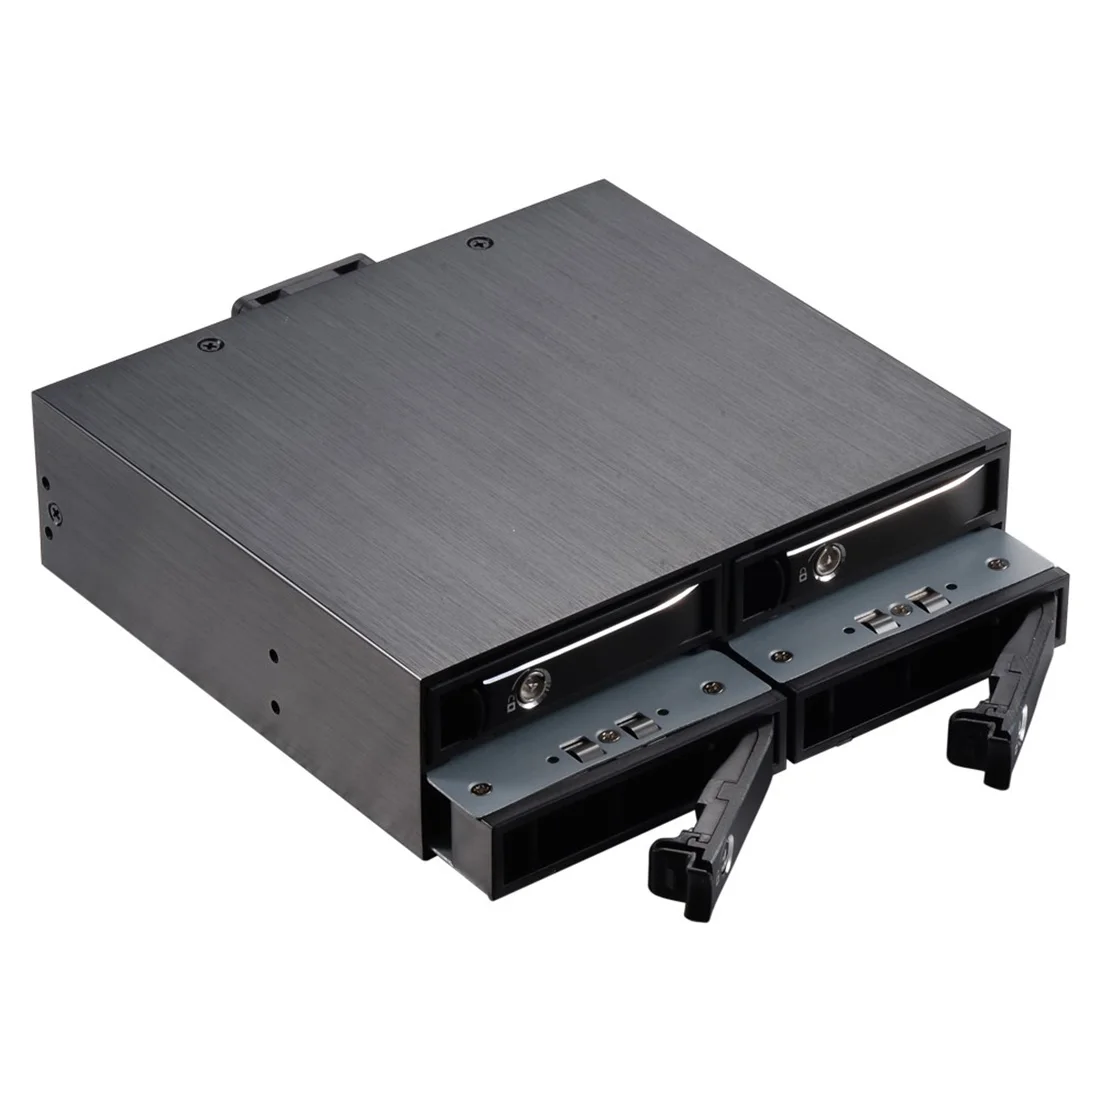 

4-bay 2.5 inch Internal SATA HDD/SSD Aluminum Mobile Rack with Hot-swap Support 7mm / 9.5mm / 15mm HDD/SSD Enclosure with Lock